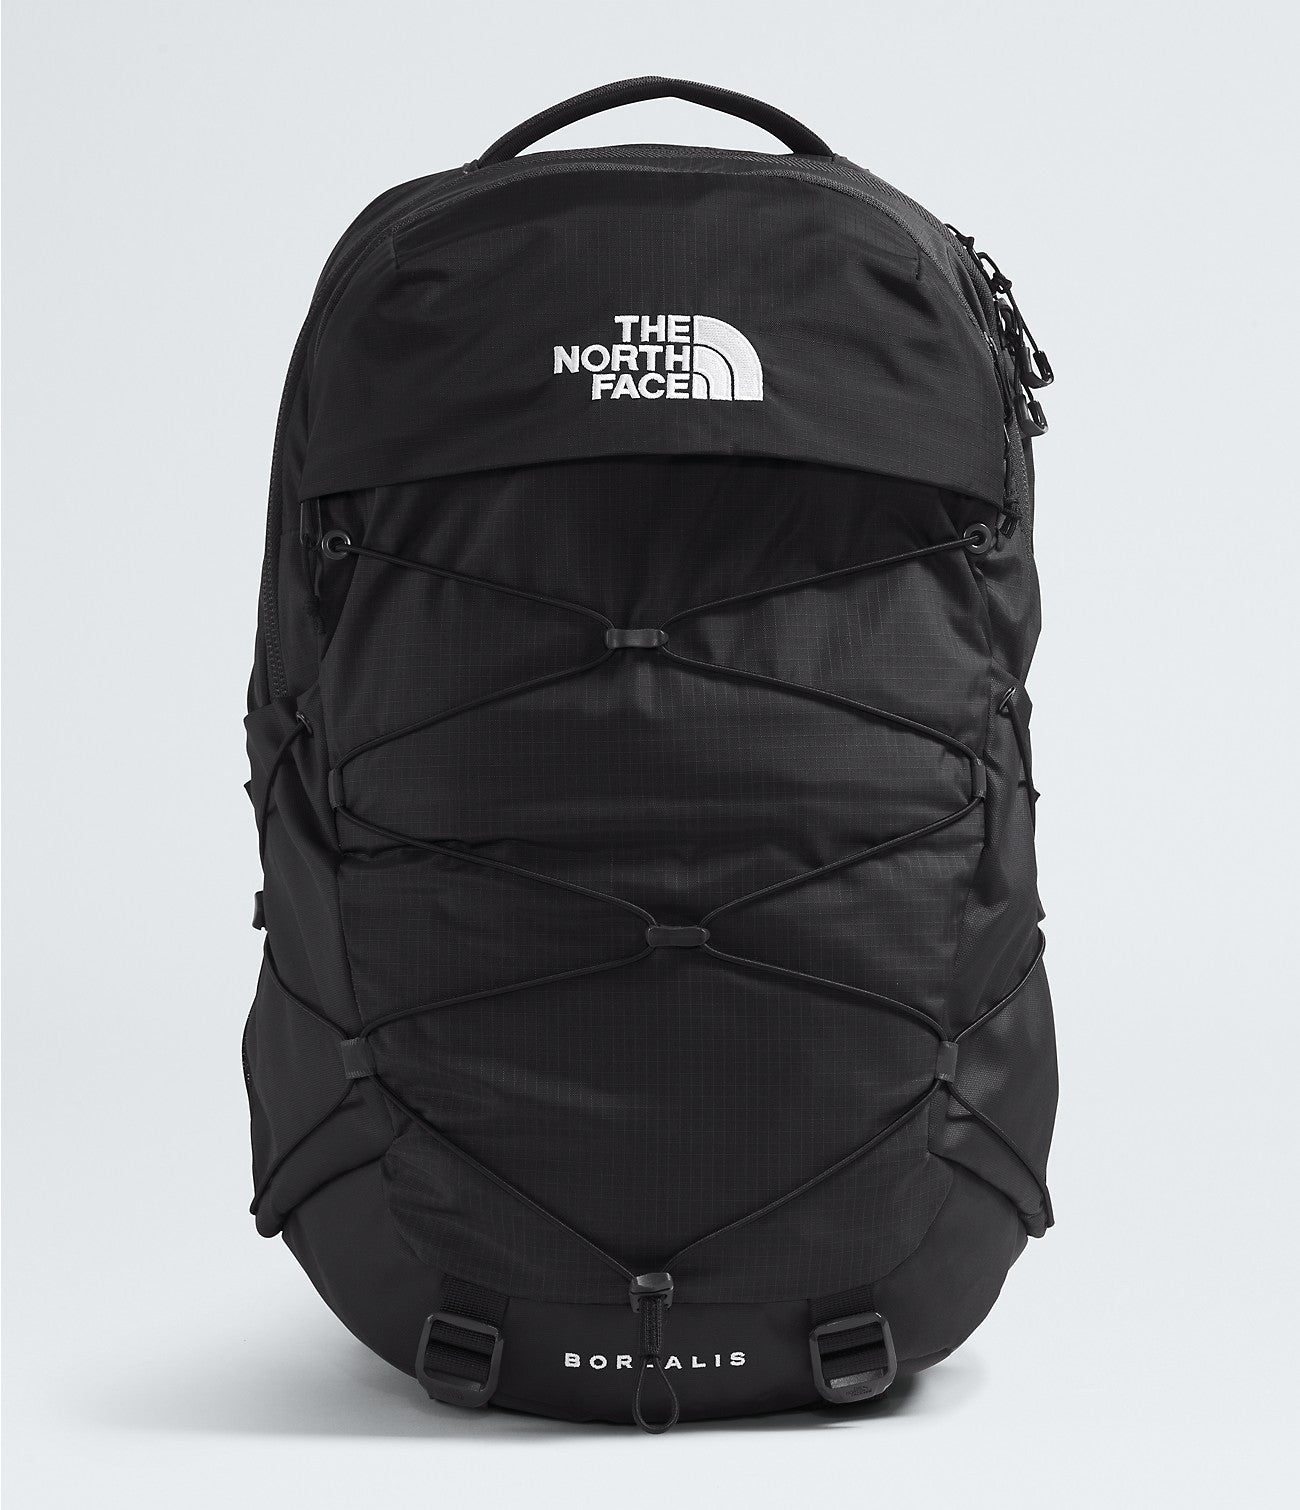 The North Face Borealis Backpack Accessories North Face TNF Black/TNF Black-4H7  